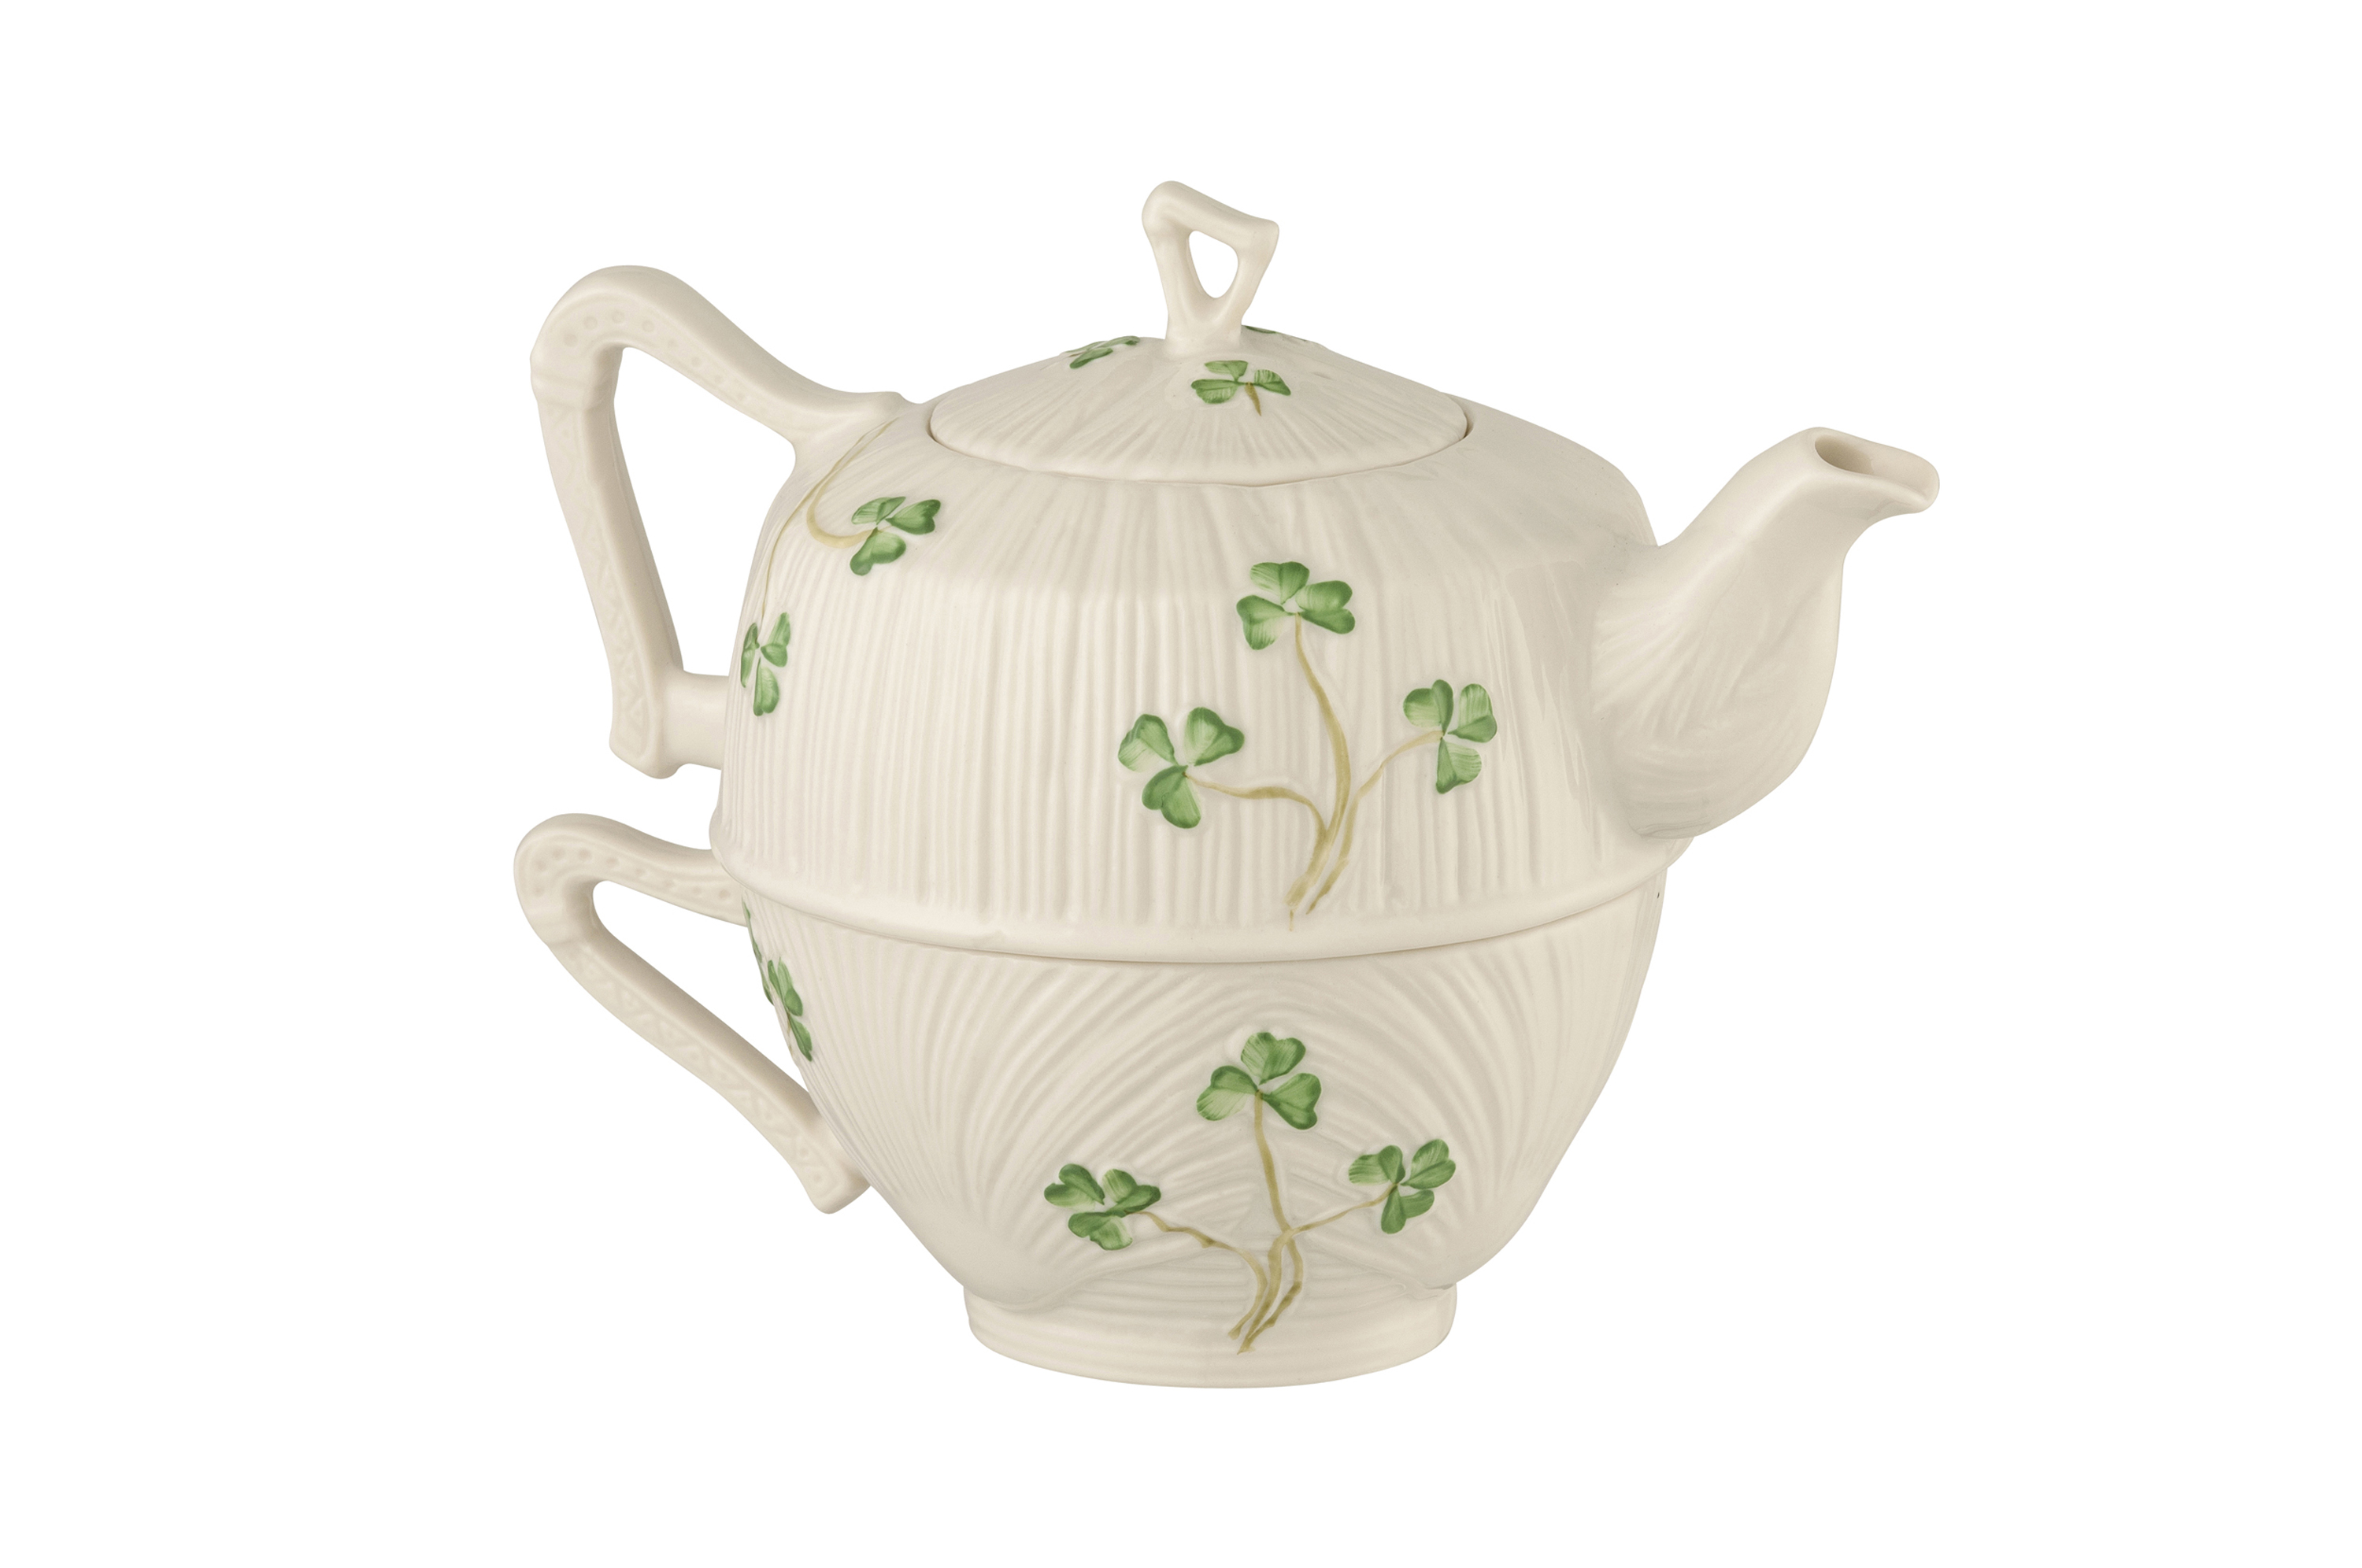 Irish Gifts - teapots, blankets and much more!IrishShop.com Gifts For Someone Going To Ireland